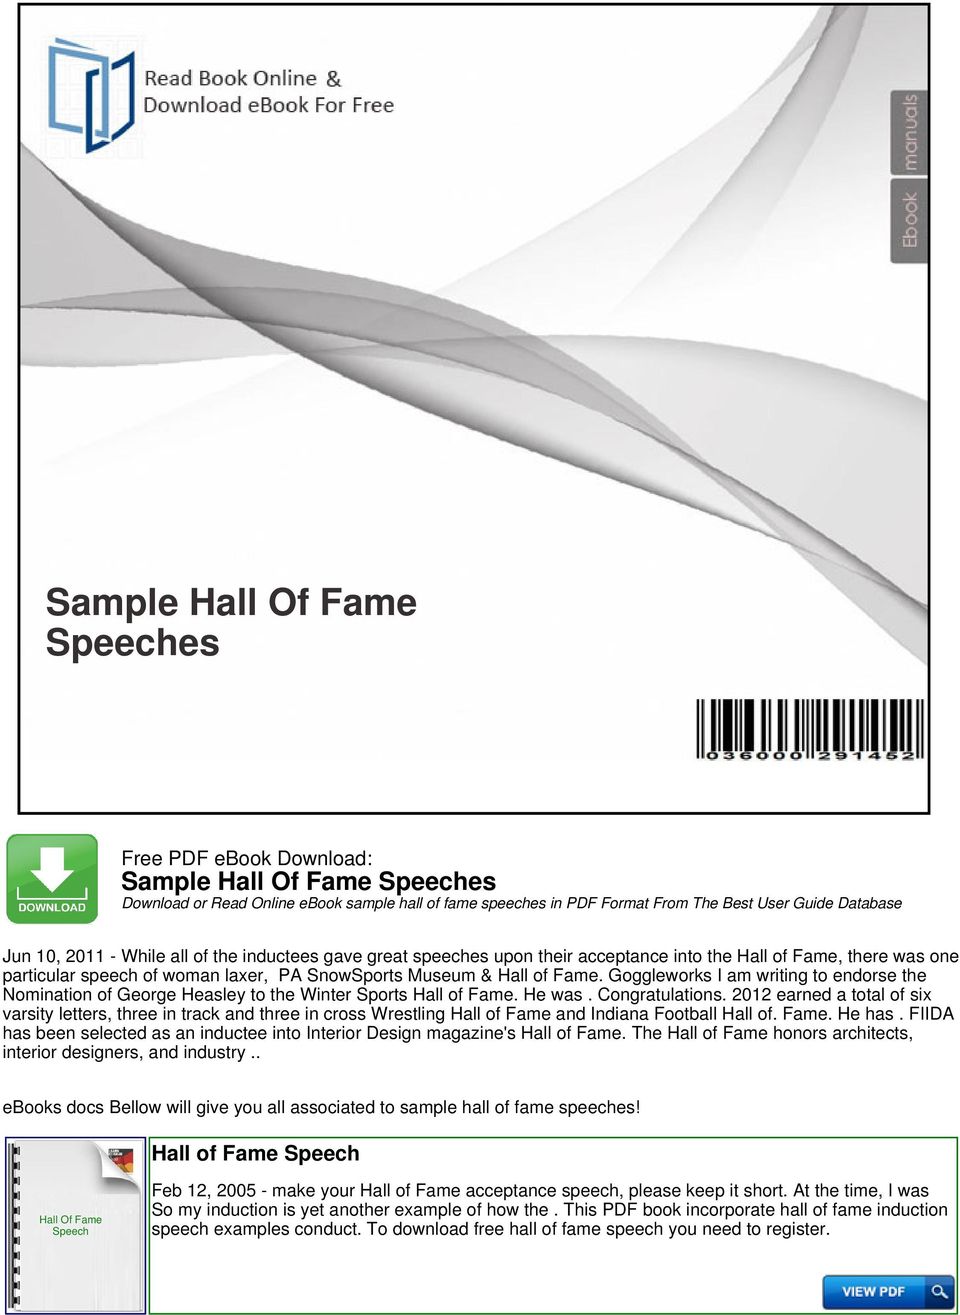 Sample Hall Of Fame Speeches - PDF Free Download